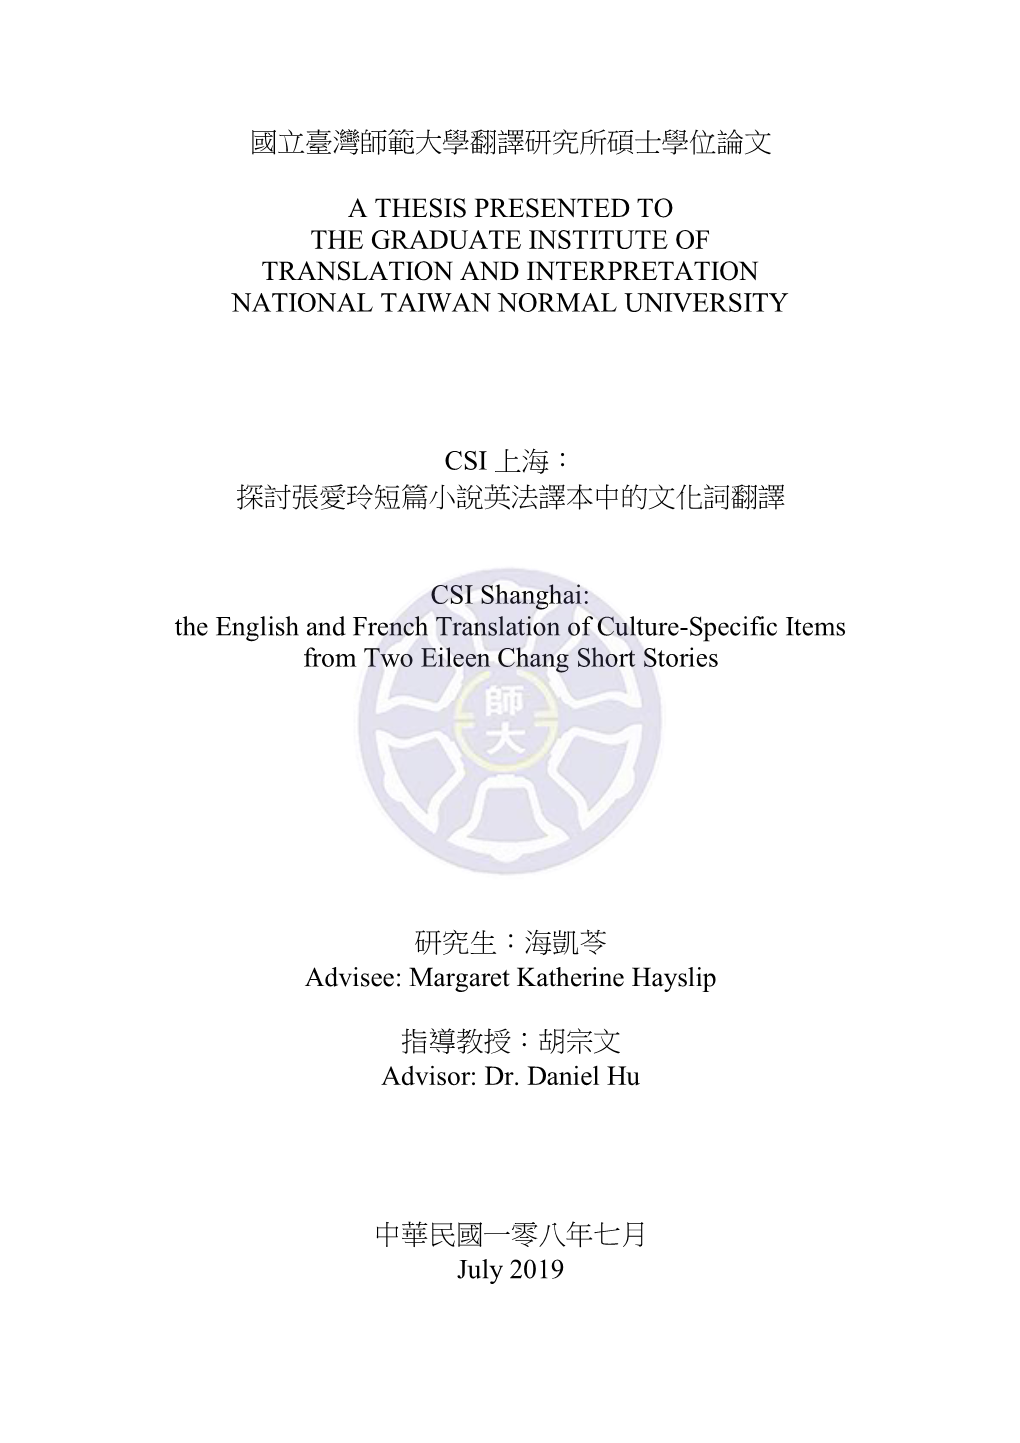 A Thesis Presented to the Graduate Institute of Translation and Interpretation National Taiwan Normal University